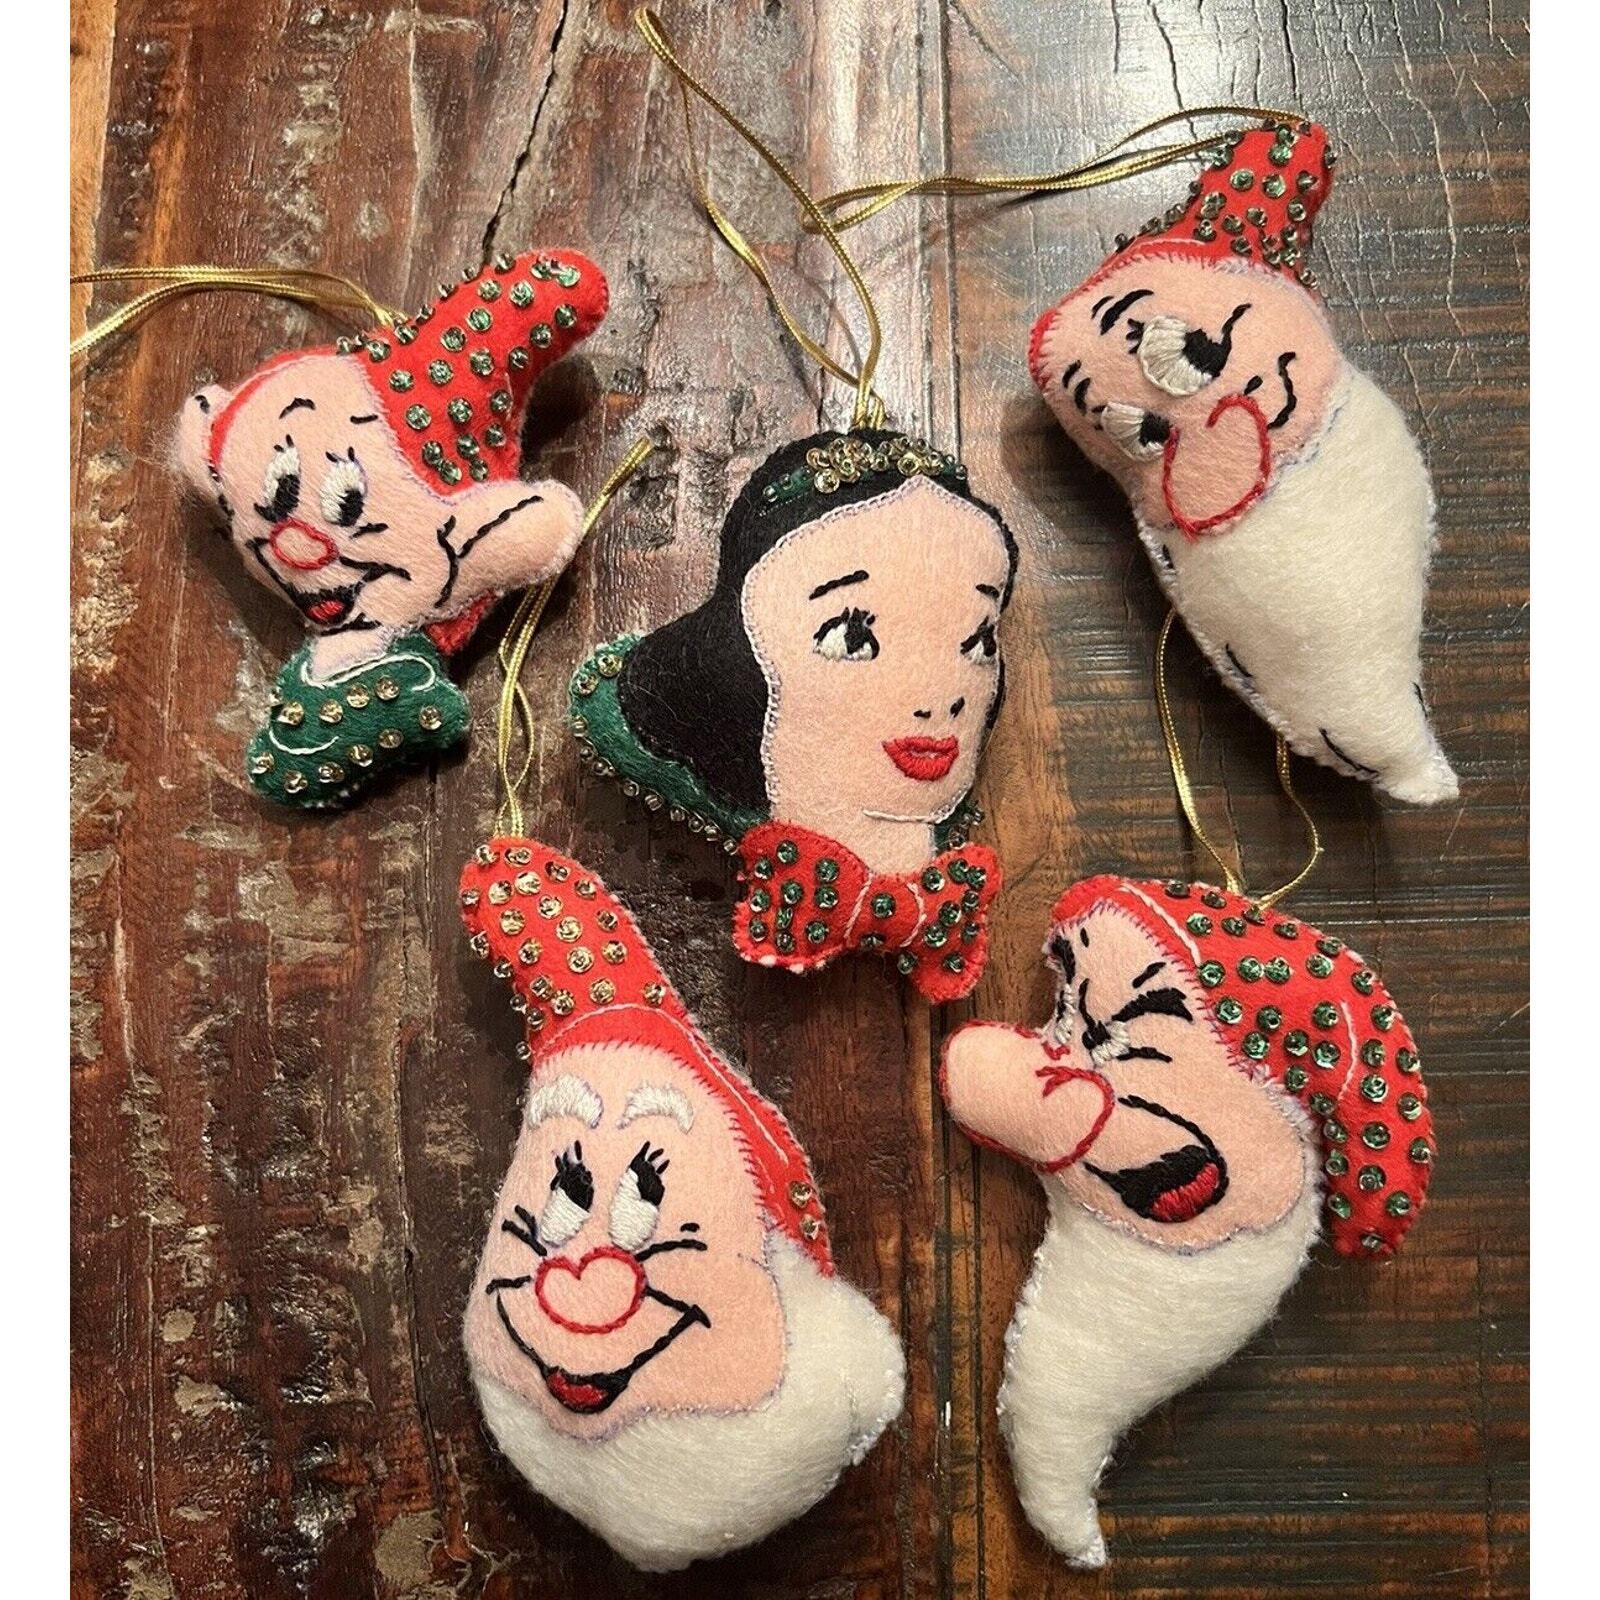 Vintage Paragon Snow White And The Seven Dwarfs Ornaments Lot Of 5 Handmade